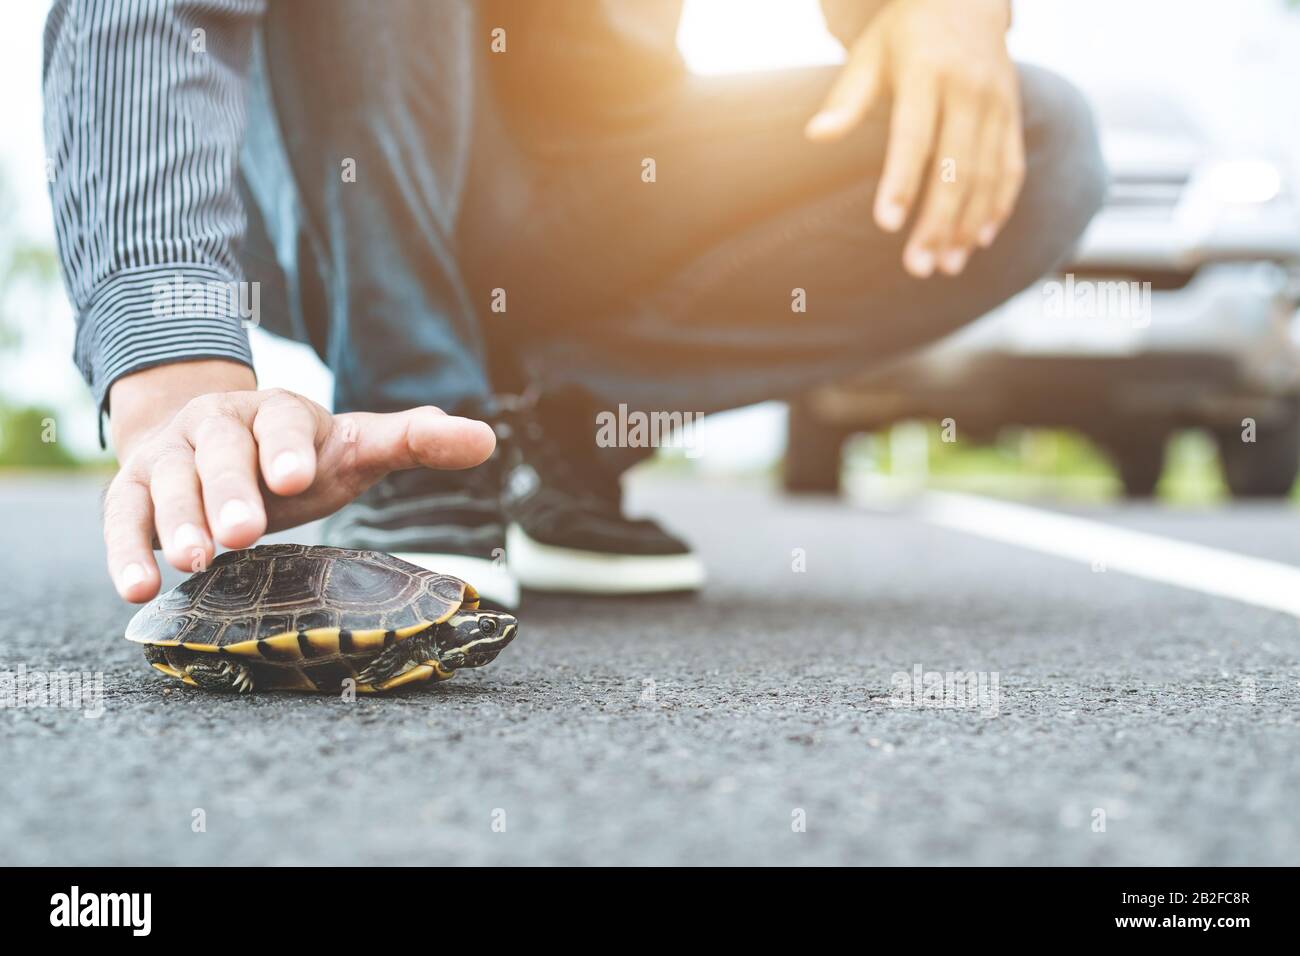 Turtle crossing the road. Driver stop the car and help turtle on the road. Safety and be careful driving concept Stock Photo